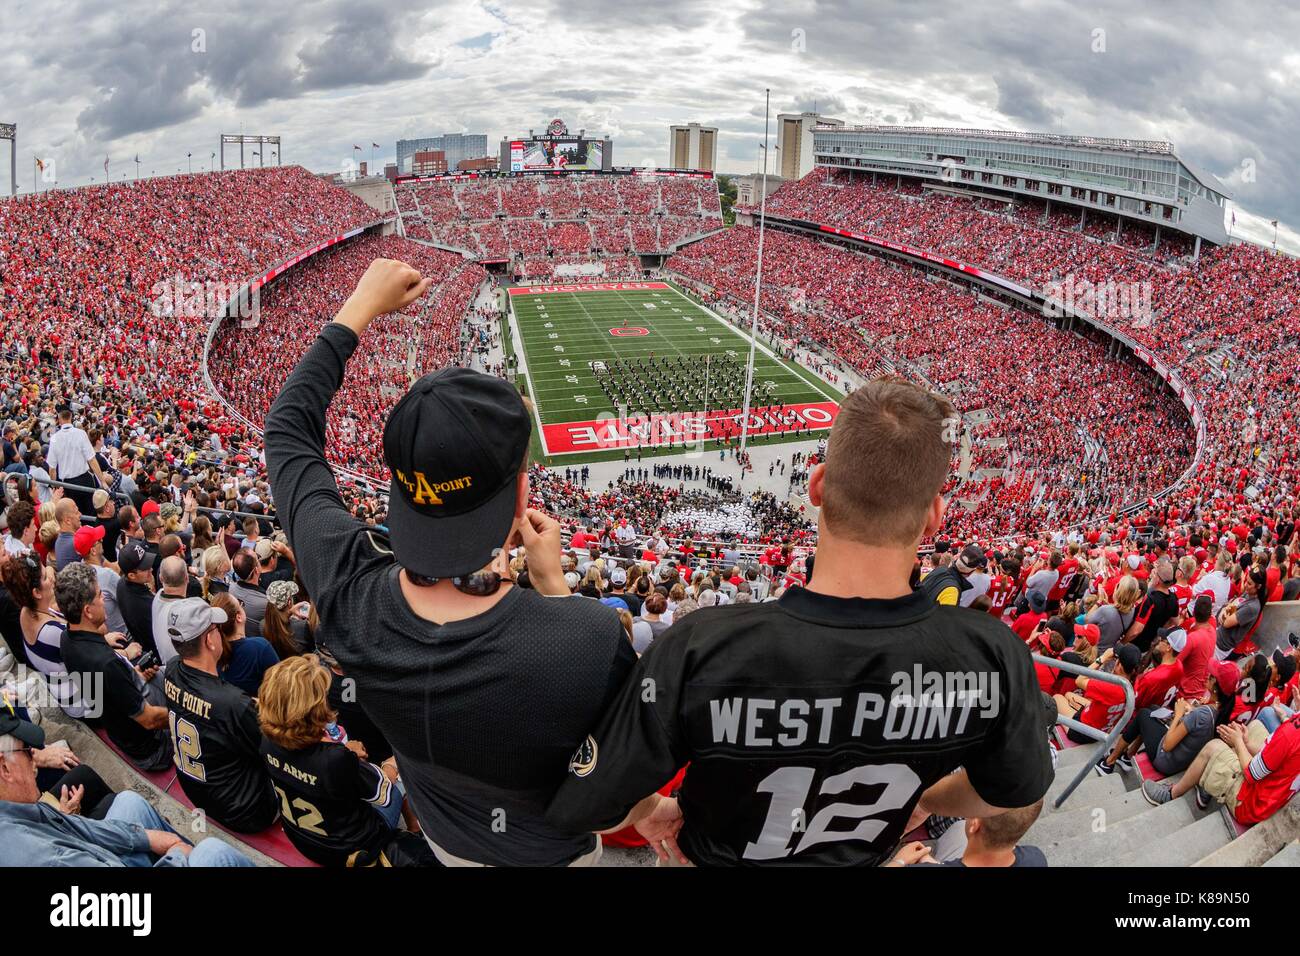 Ohio Stadium, Columbus, OH, USA. 16th Sep, 2017. West Point fans cheer on the Ohio State University marching band in an NCAA football game between the Ohio State Buckeyes and the Army Black Knights at Ohio Stadium, Columbus, OH. Adam Lacy/CSM/Alamy Live News Stock Photo